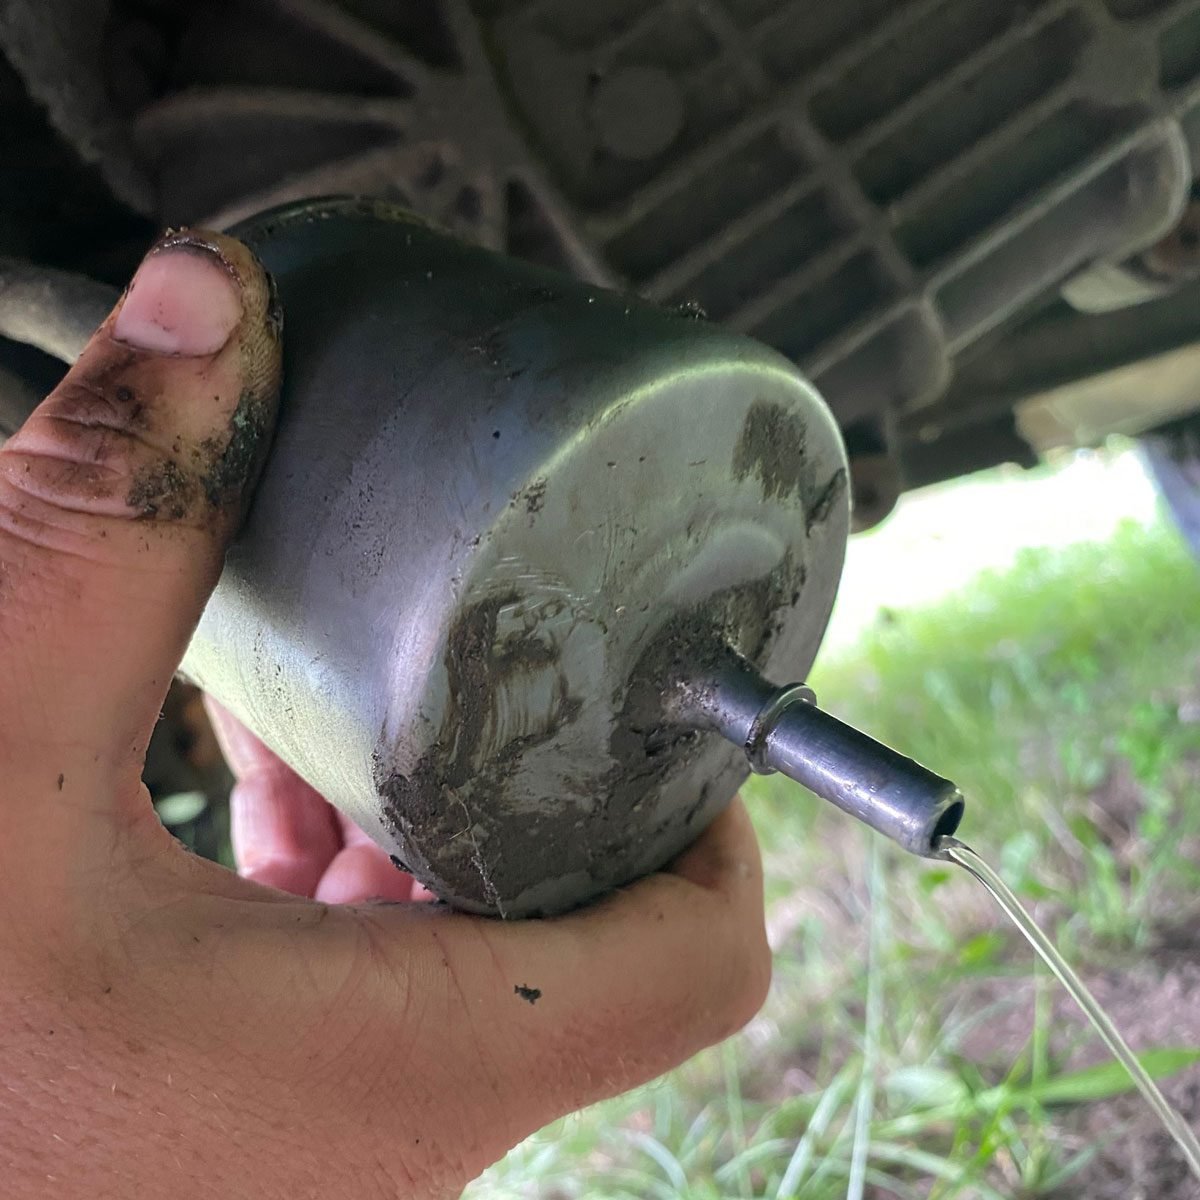 How to Replace Your Car's Fuel Filter (DIY)